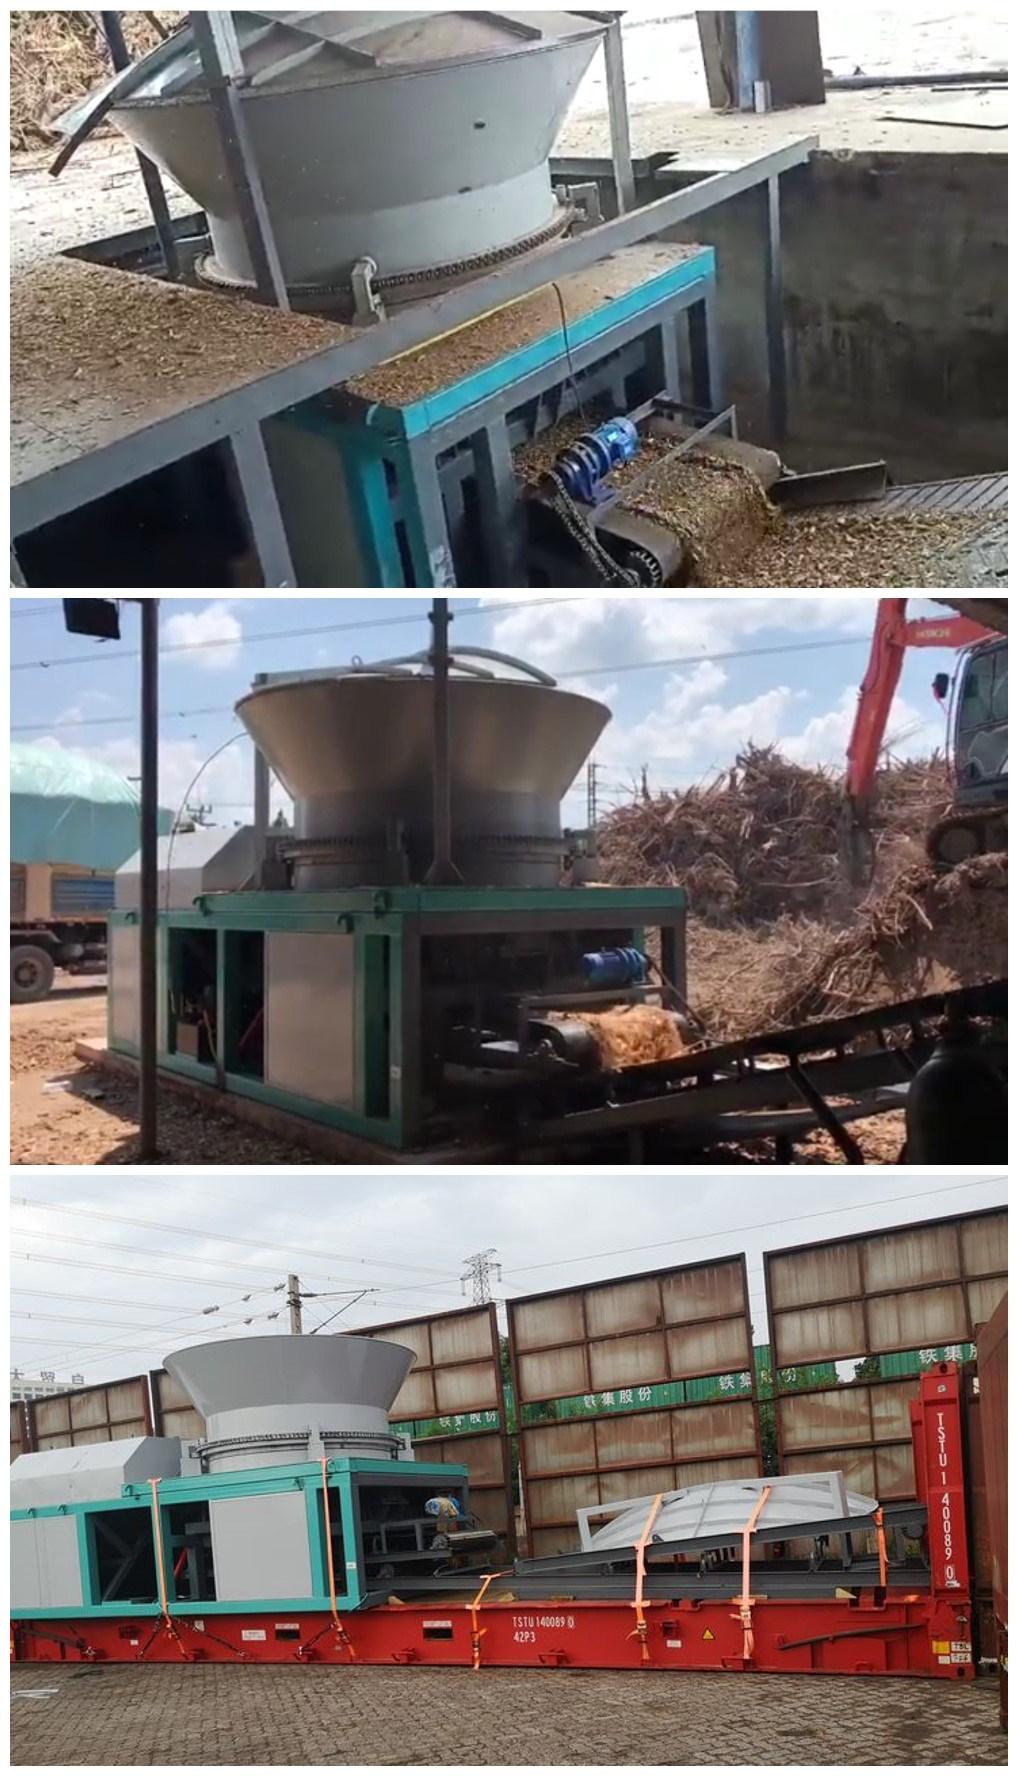 Wood Shredder Wood Crusher Factory Direct Supplier with High Quality